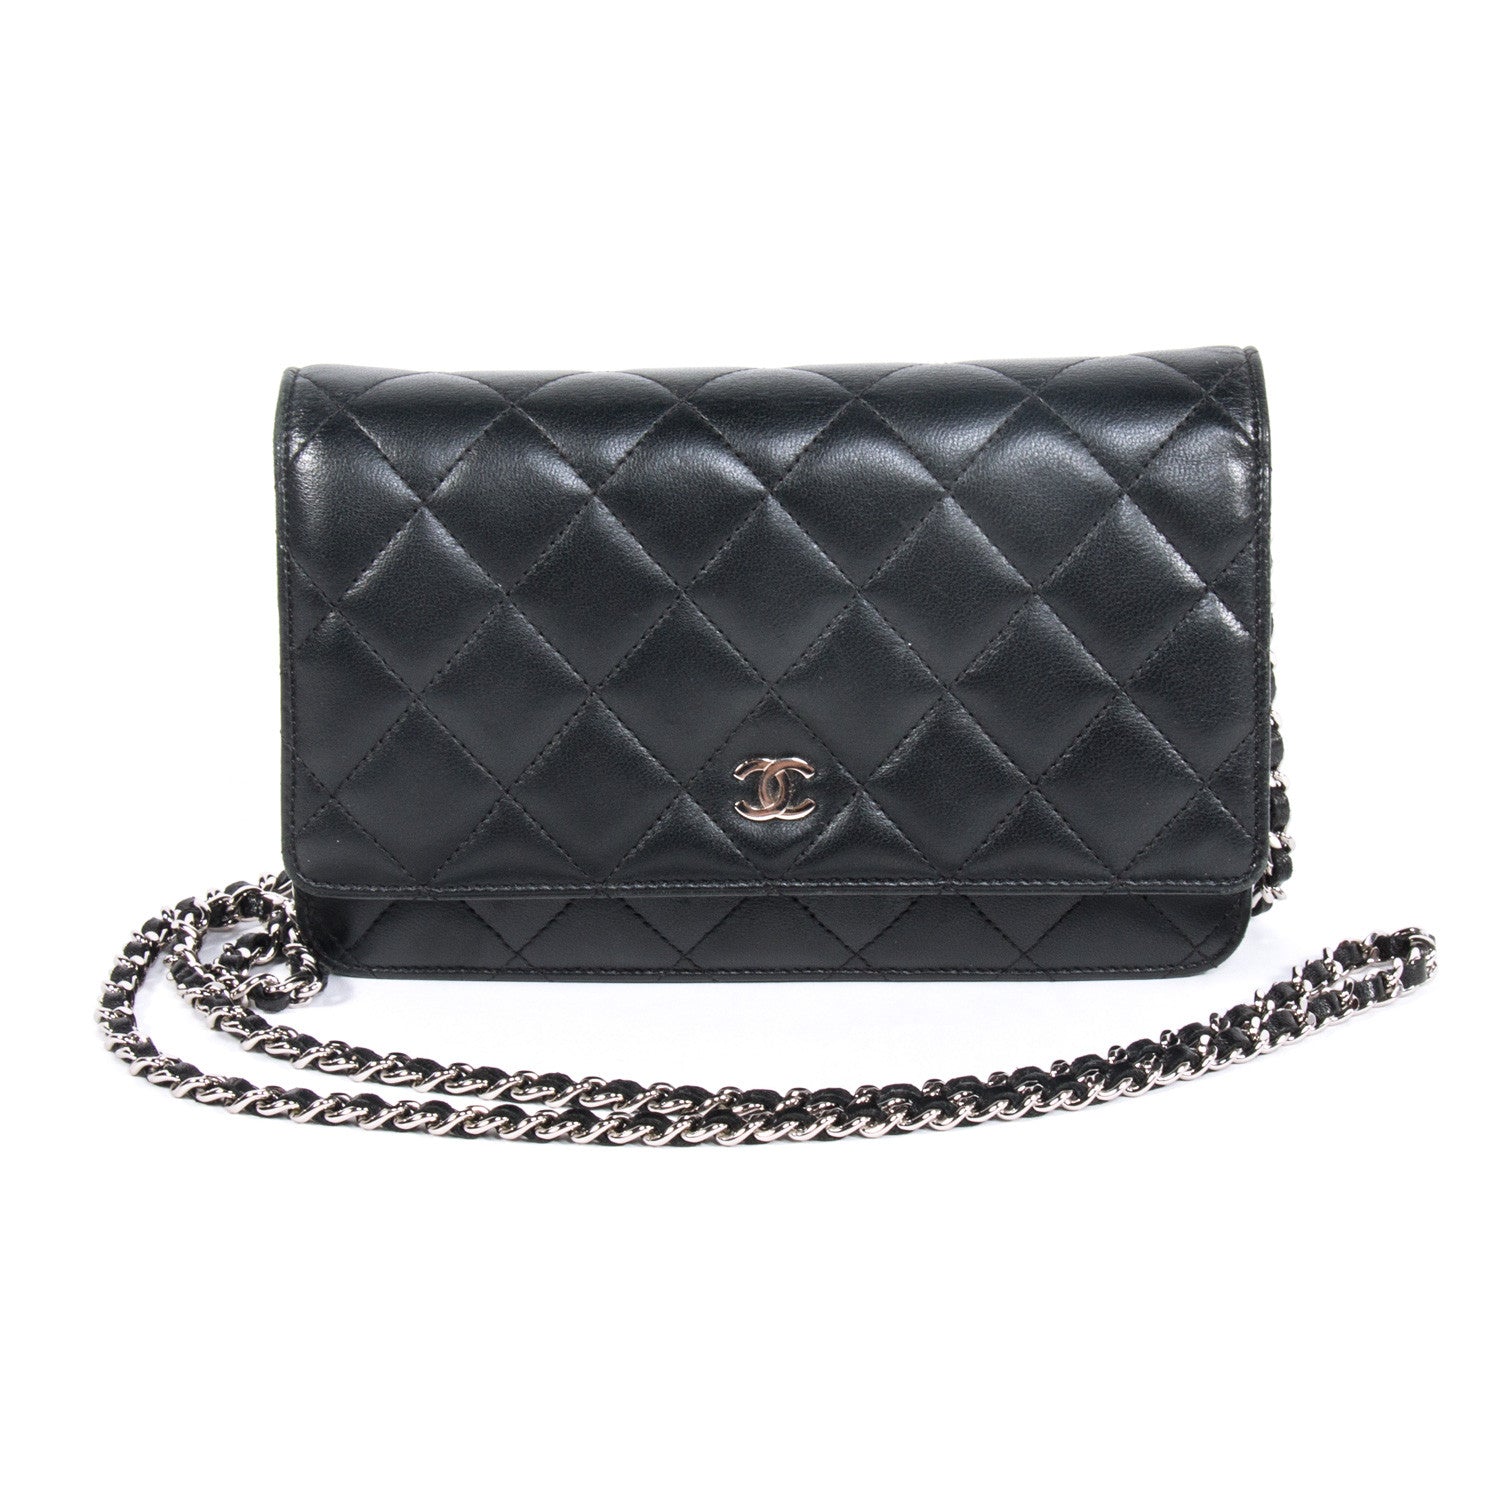 Shop authentic Chanel Quilted Chain Wallet at revogue for just USD 1,599.00